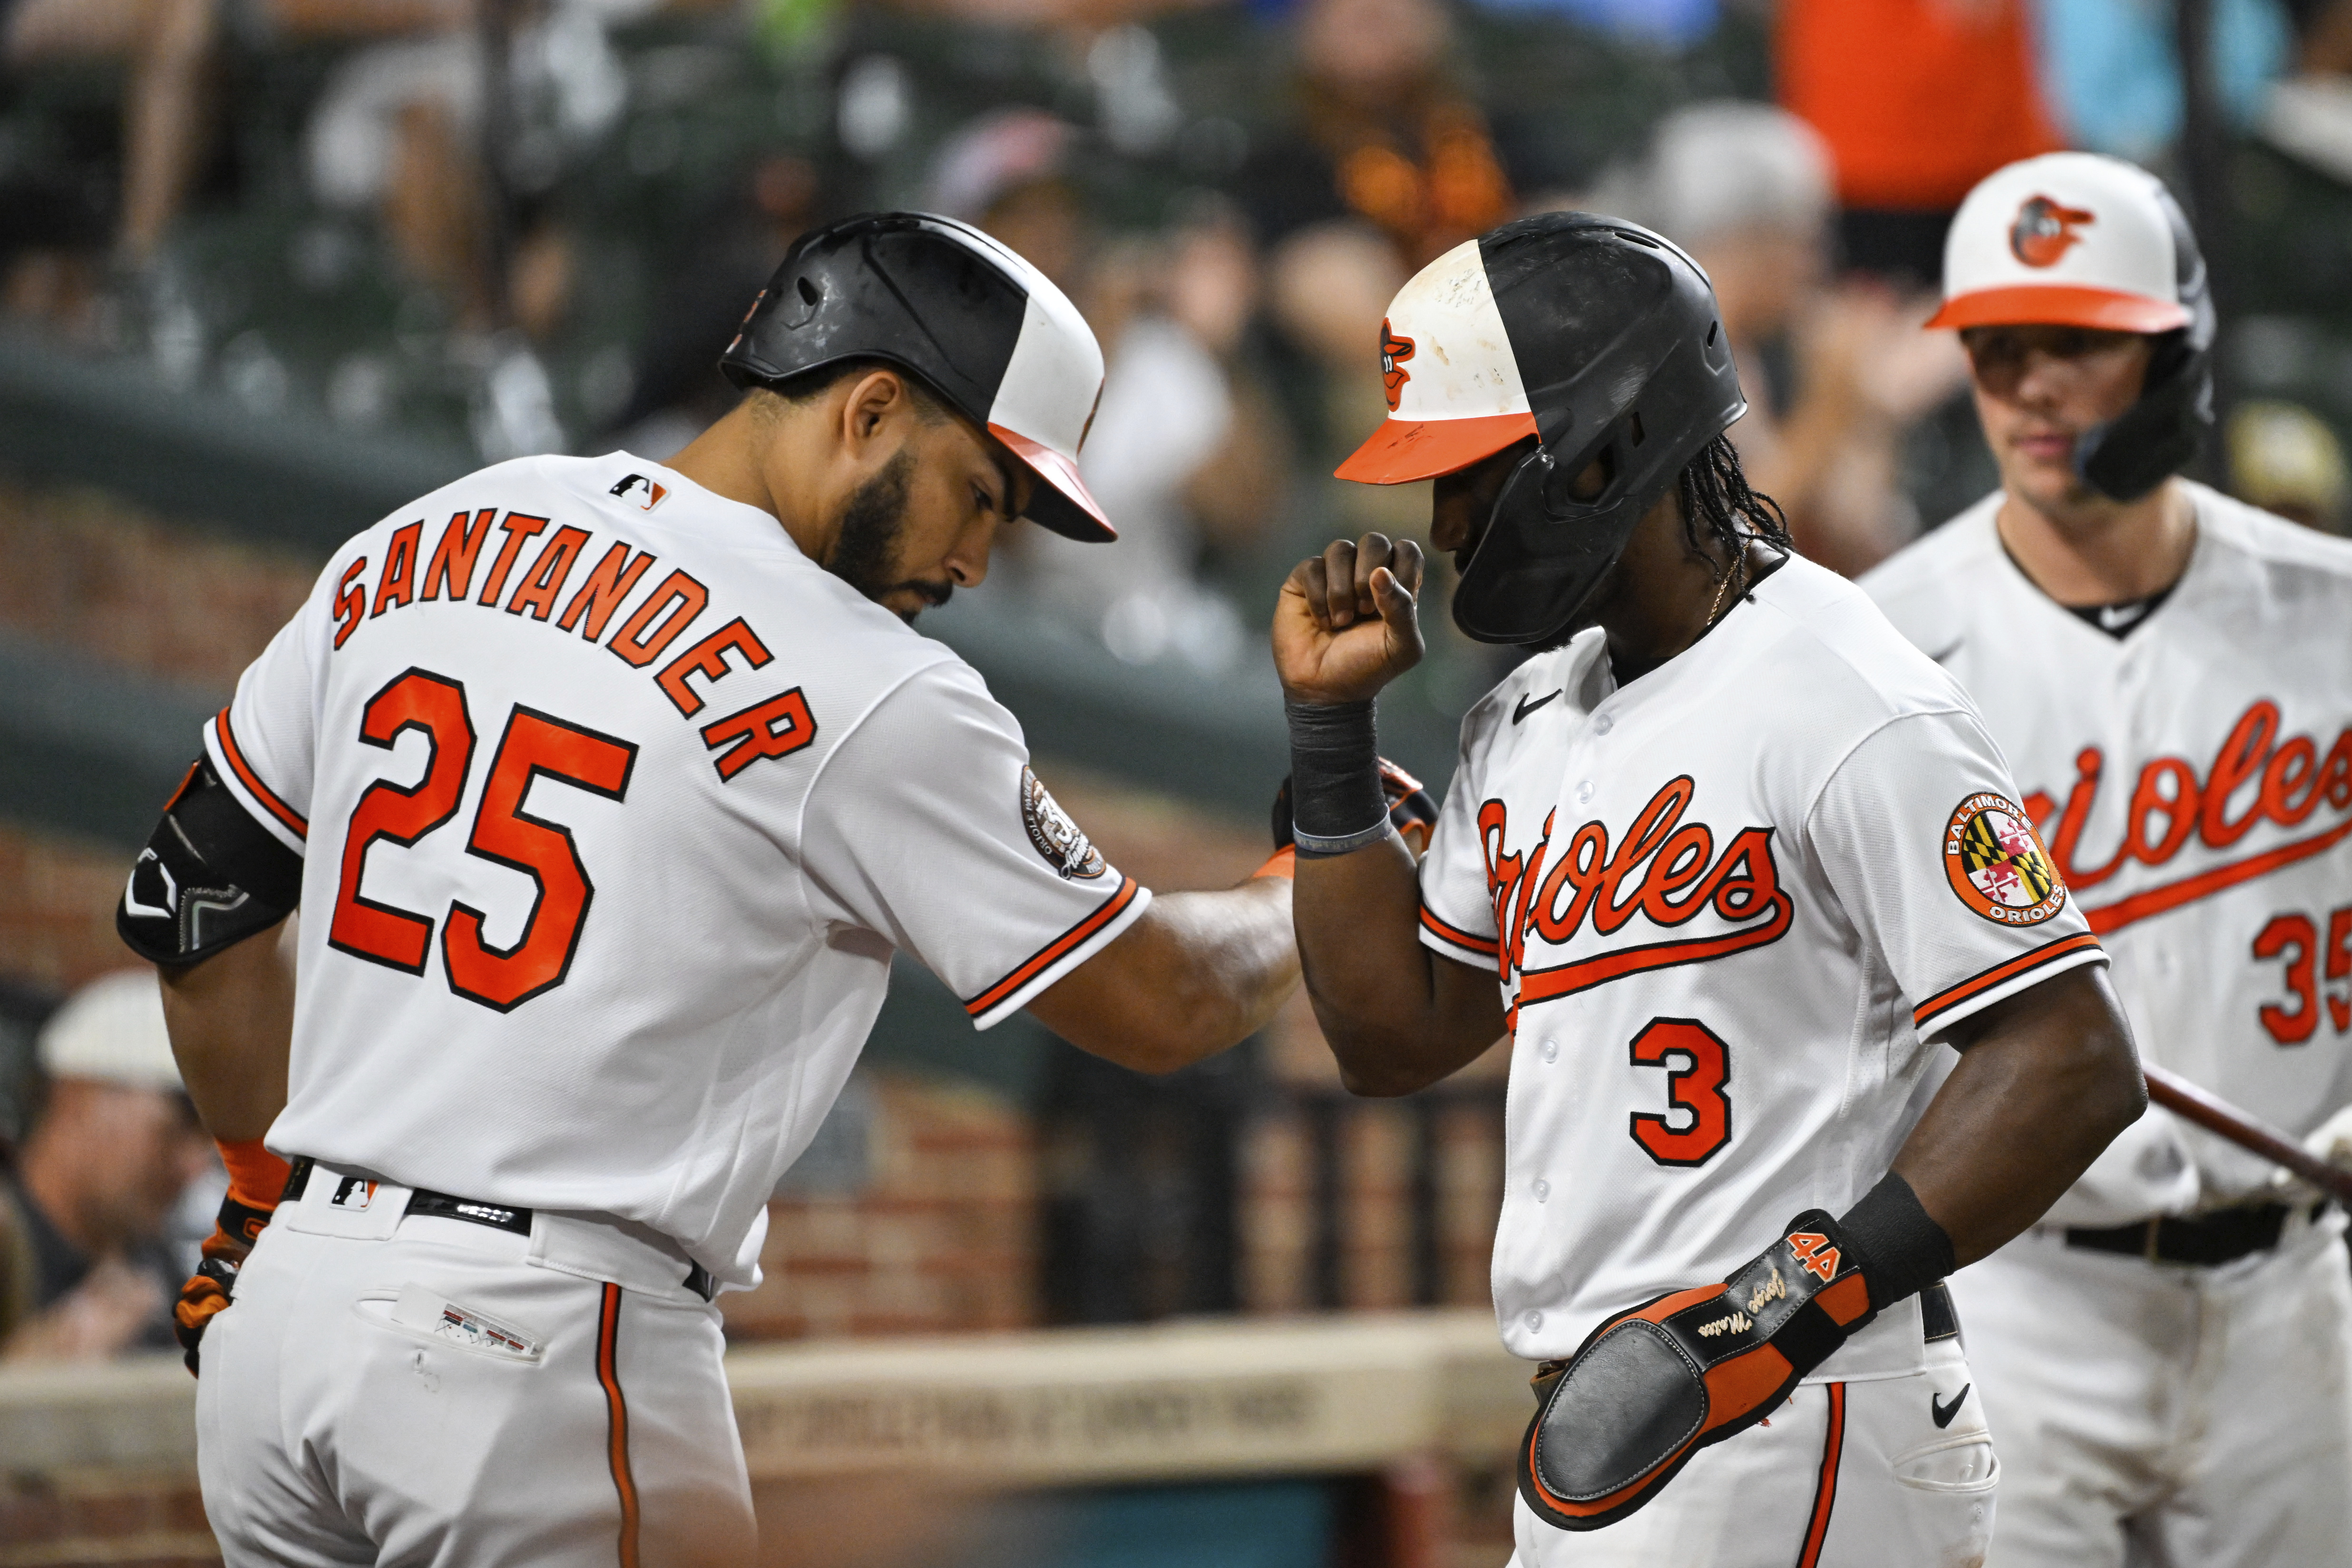 Orioles top Blue Jays 9-6 in heated matchup of contenders